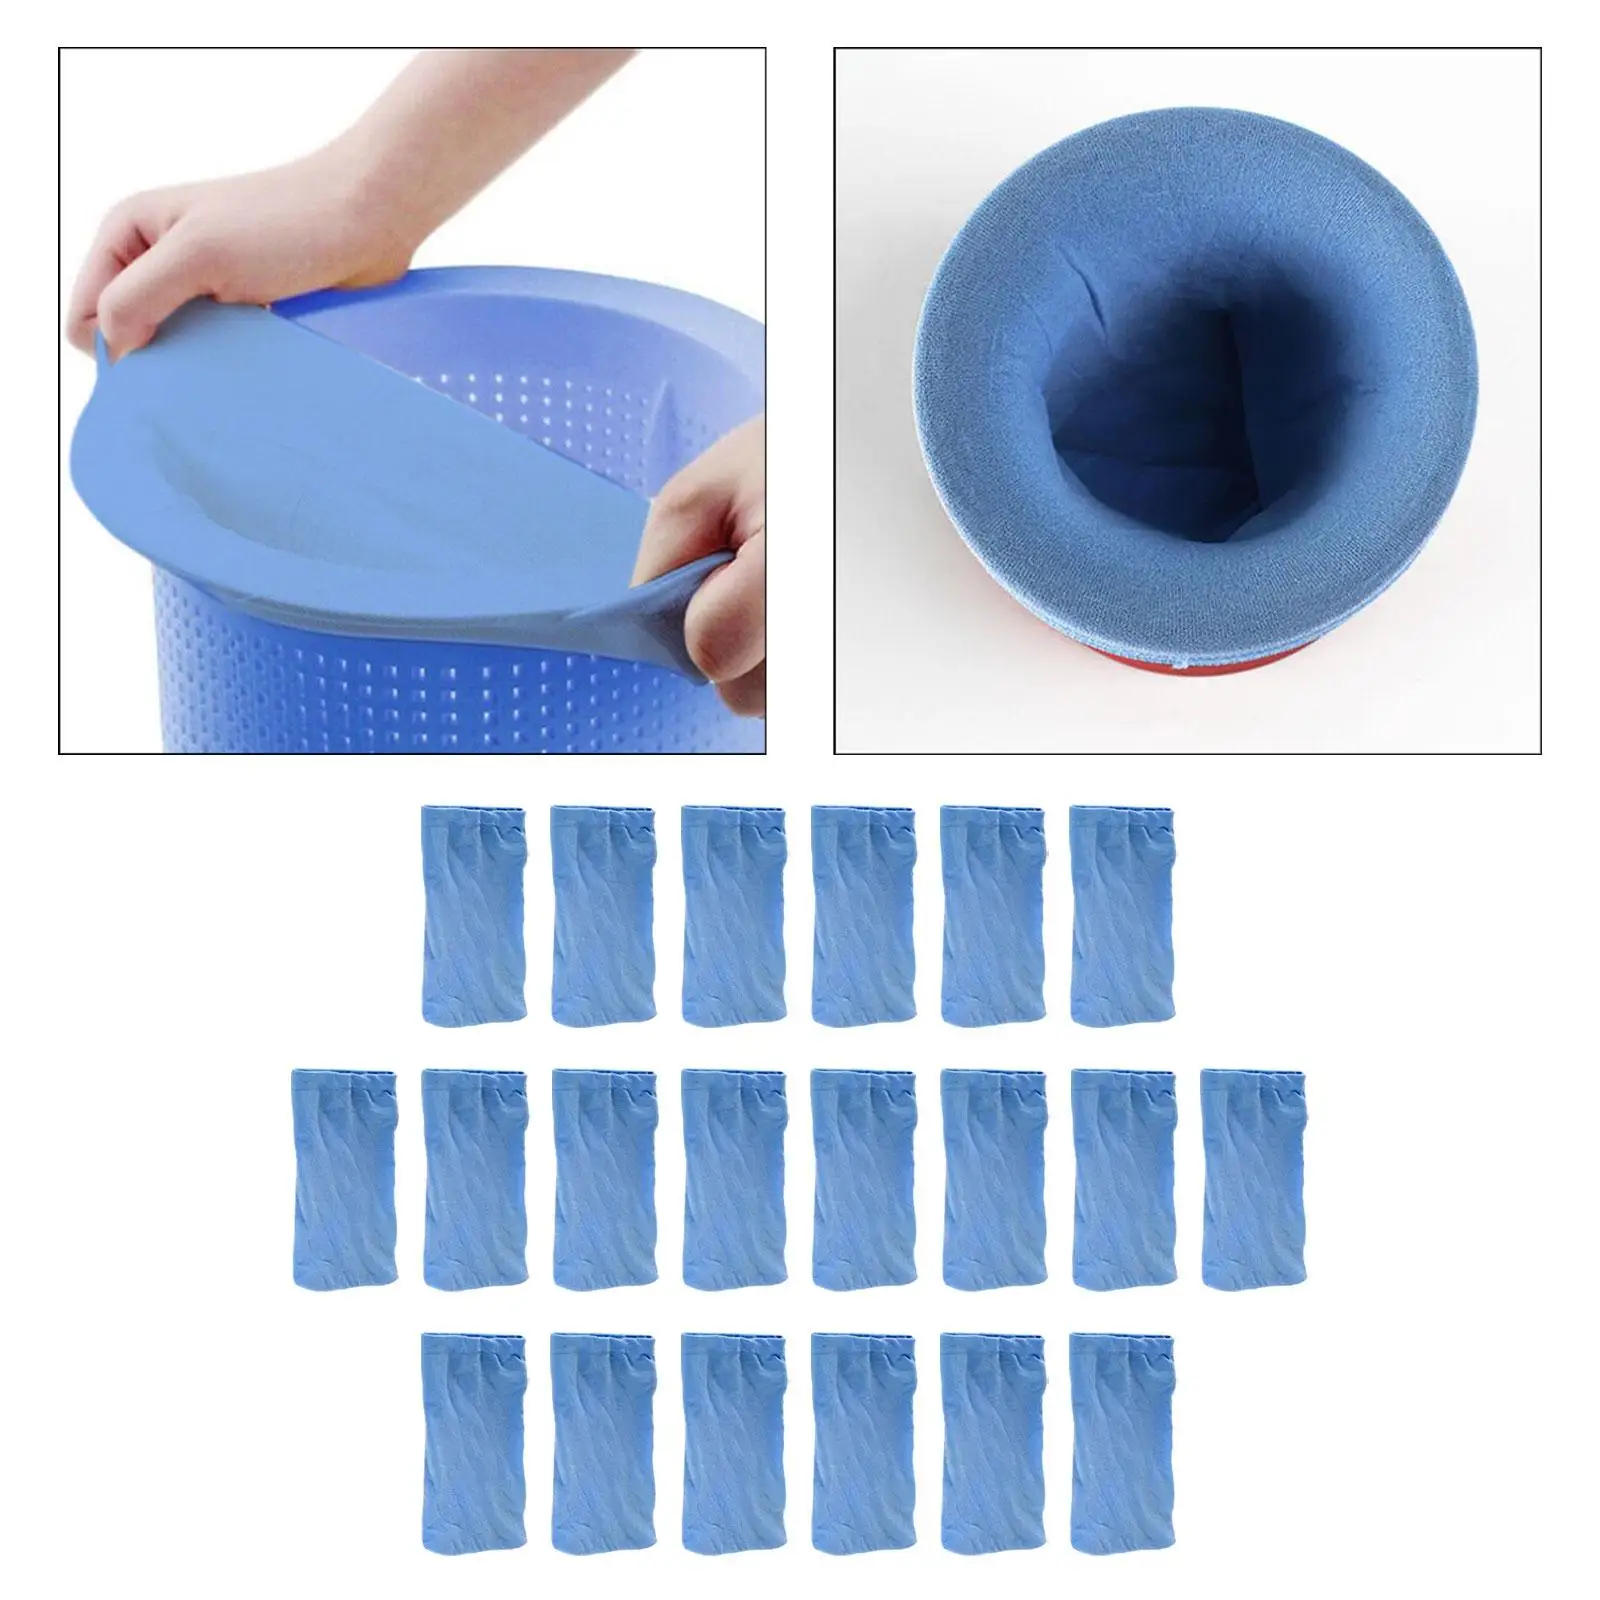 20 Pieces Pool Skimmer Socks Premium Durable Replacement Filters Baskets for Filters in Ground and above Ground Pools